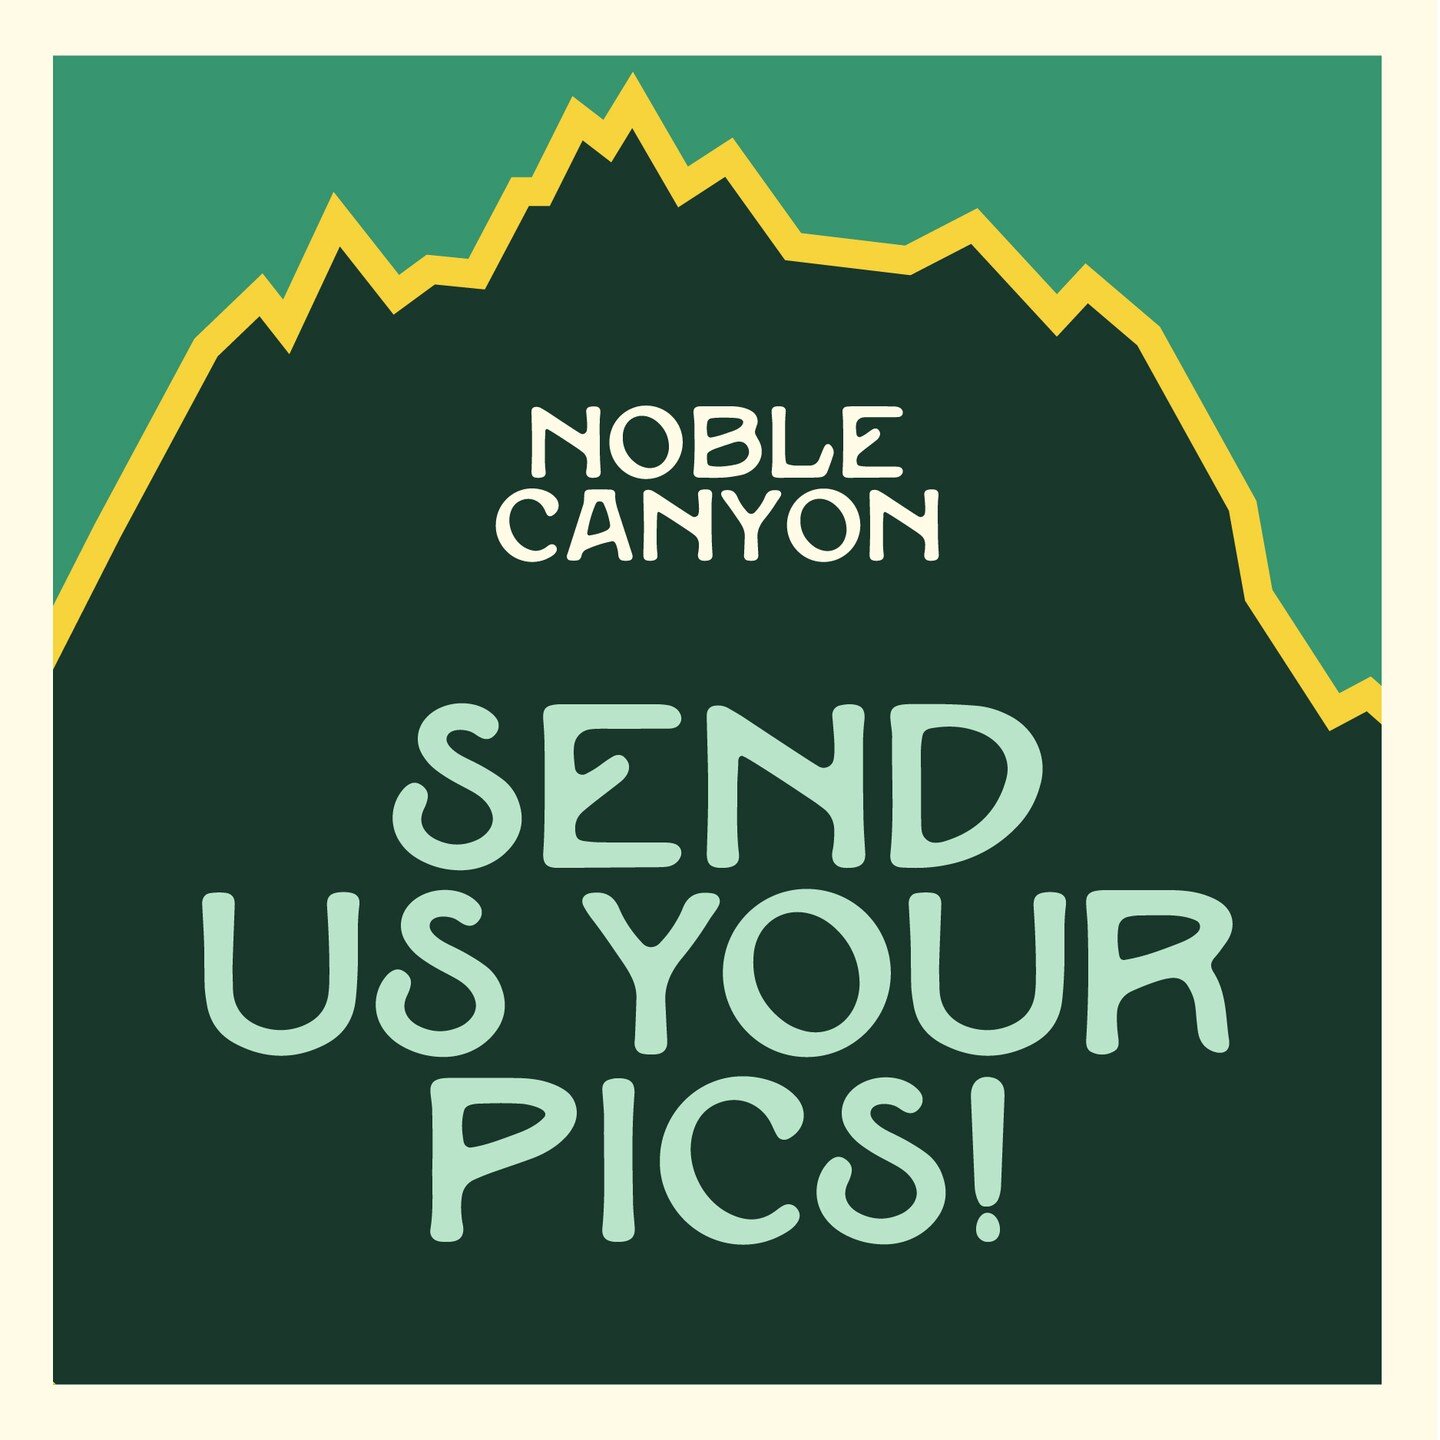 We're still reliving race day! Send us your pictures! We want to feature our friends on the Noble website! You can either email them to noblecanyon50k@gmail.com or DM the them here on IG. 
@skratchlabs @muirenergy 
@pinevalleycoffeeco